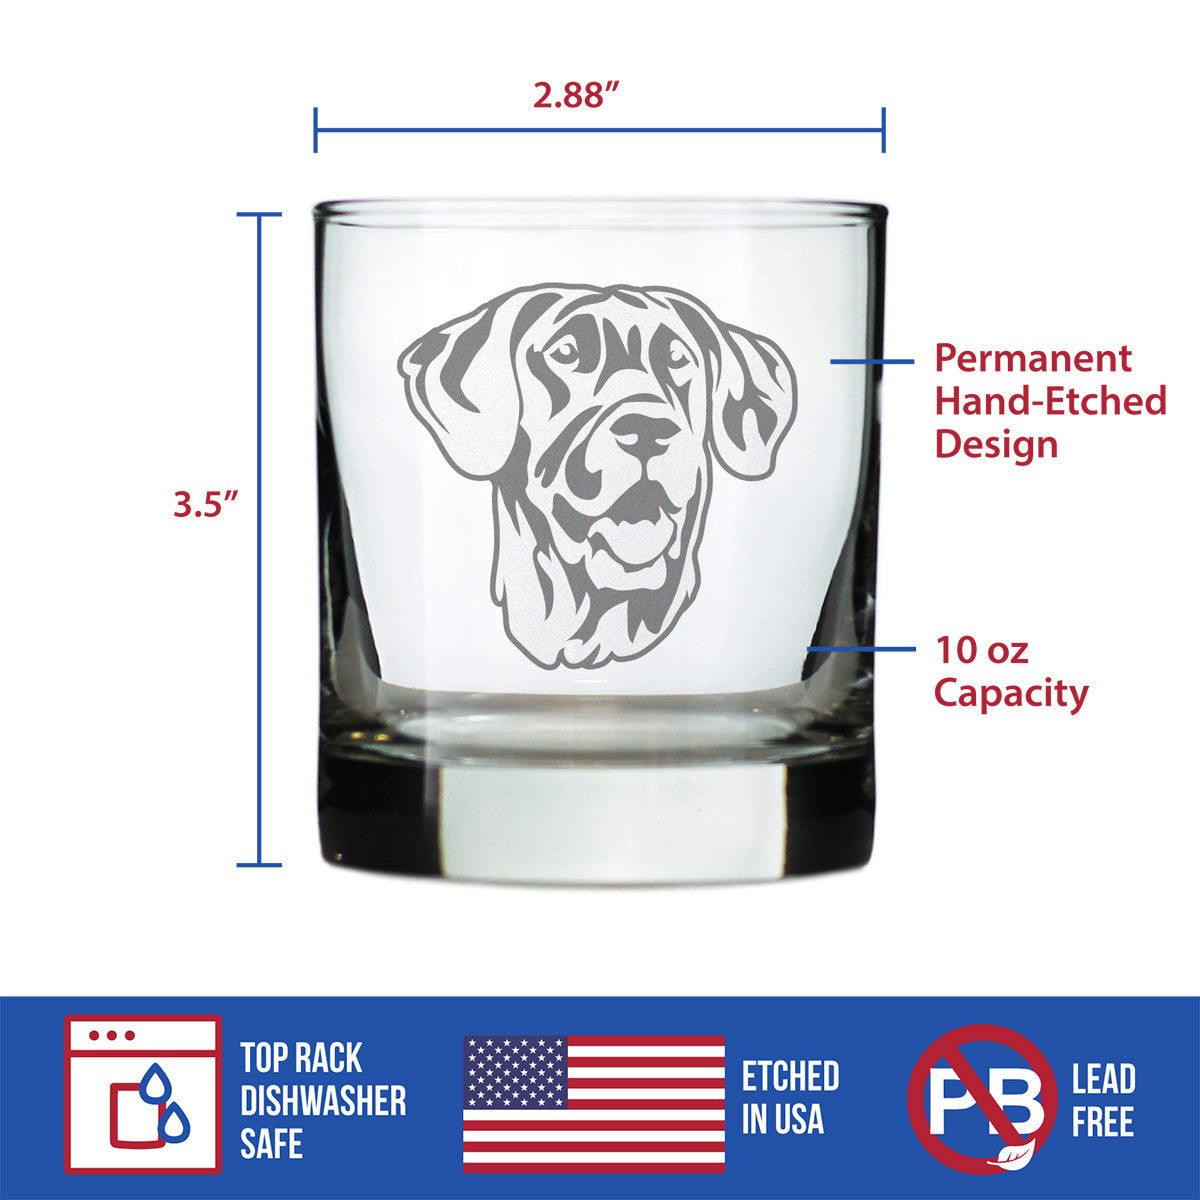 Great Dane Face Whiskey Rocks Glass - Unique Dog Themed Decor and Gifts for Moms &amp; Dads of Great Danes - 10.25 Oz